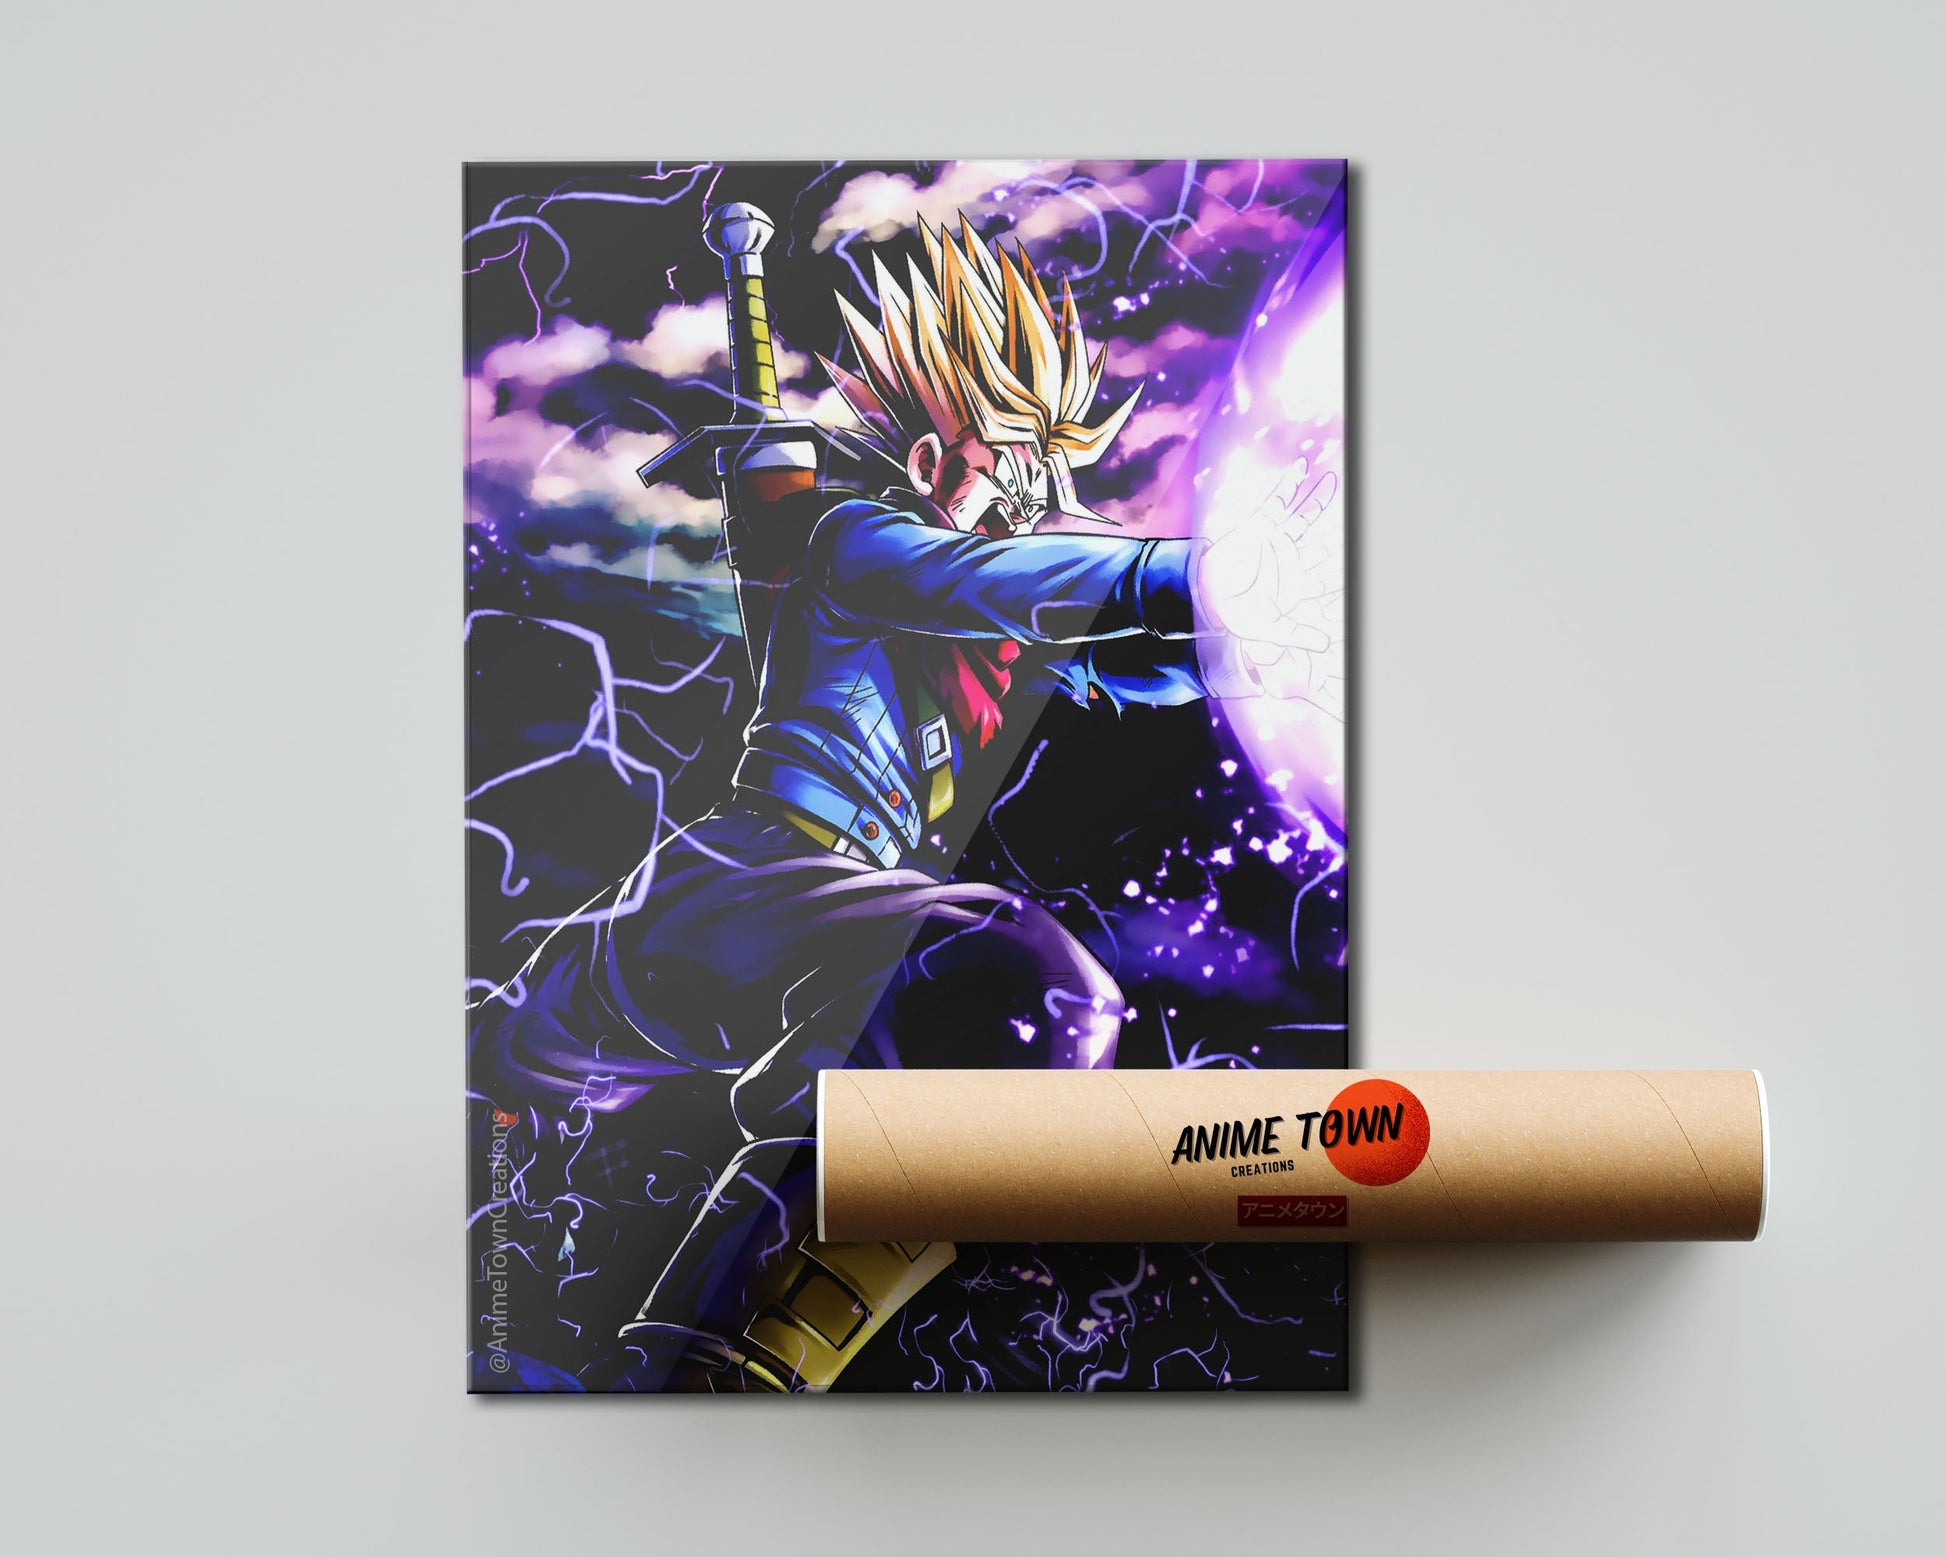 Anime Town Creations Poster Dragon Ball Trunks Blast 5" x 7" Home Goods - Anime Dragon Ball Poster